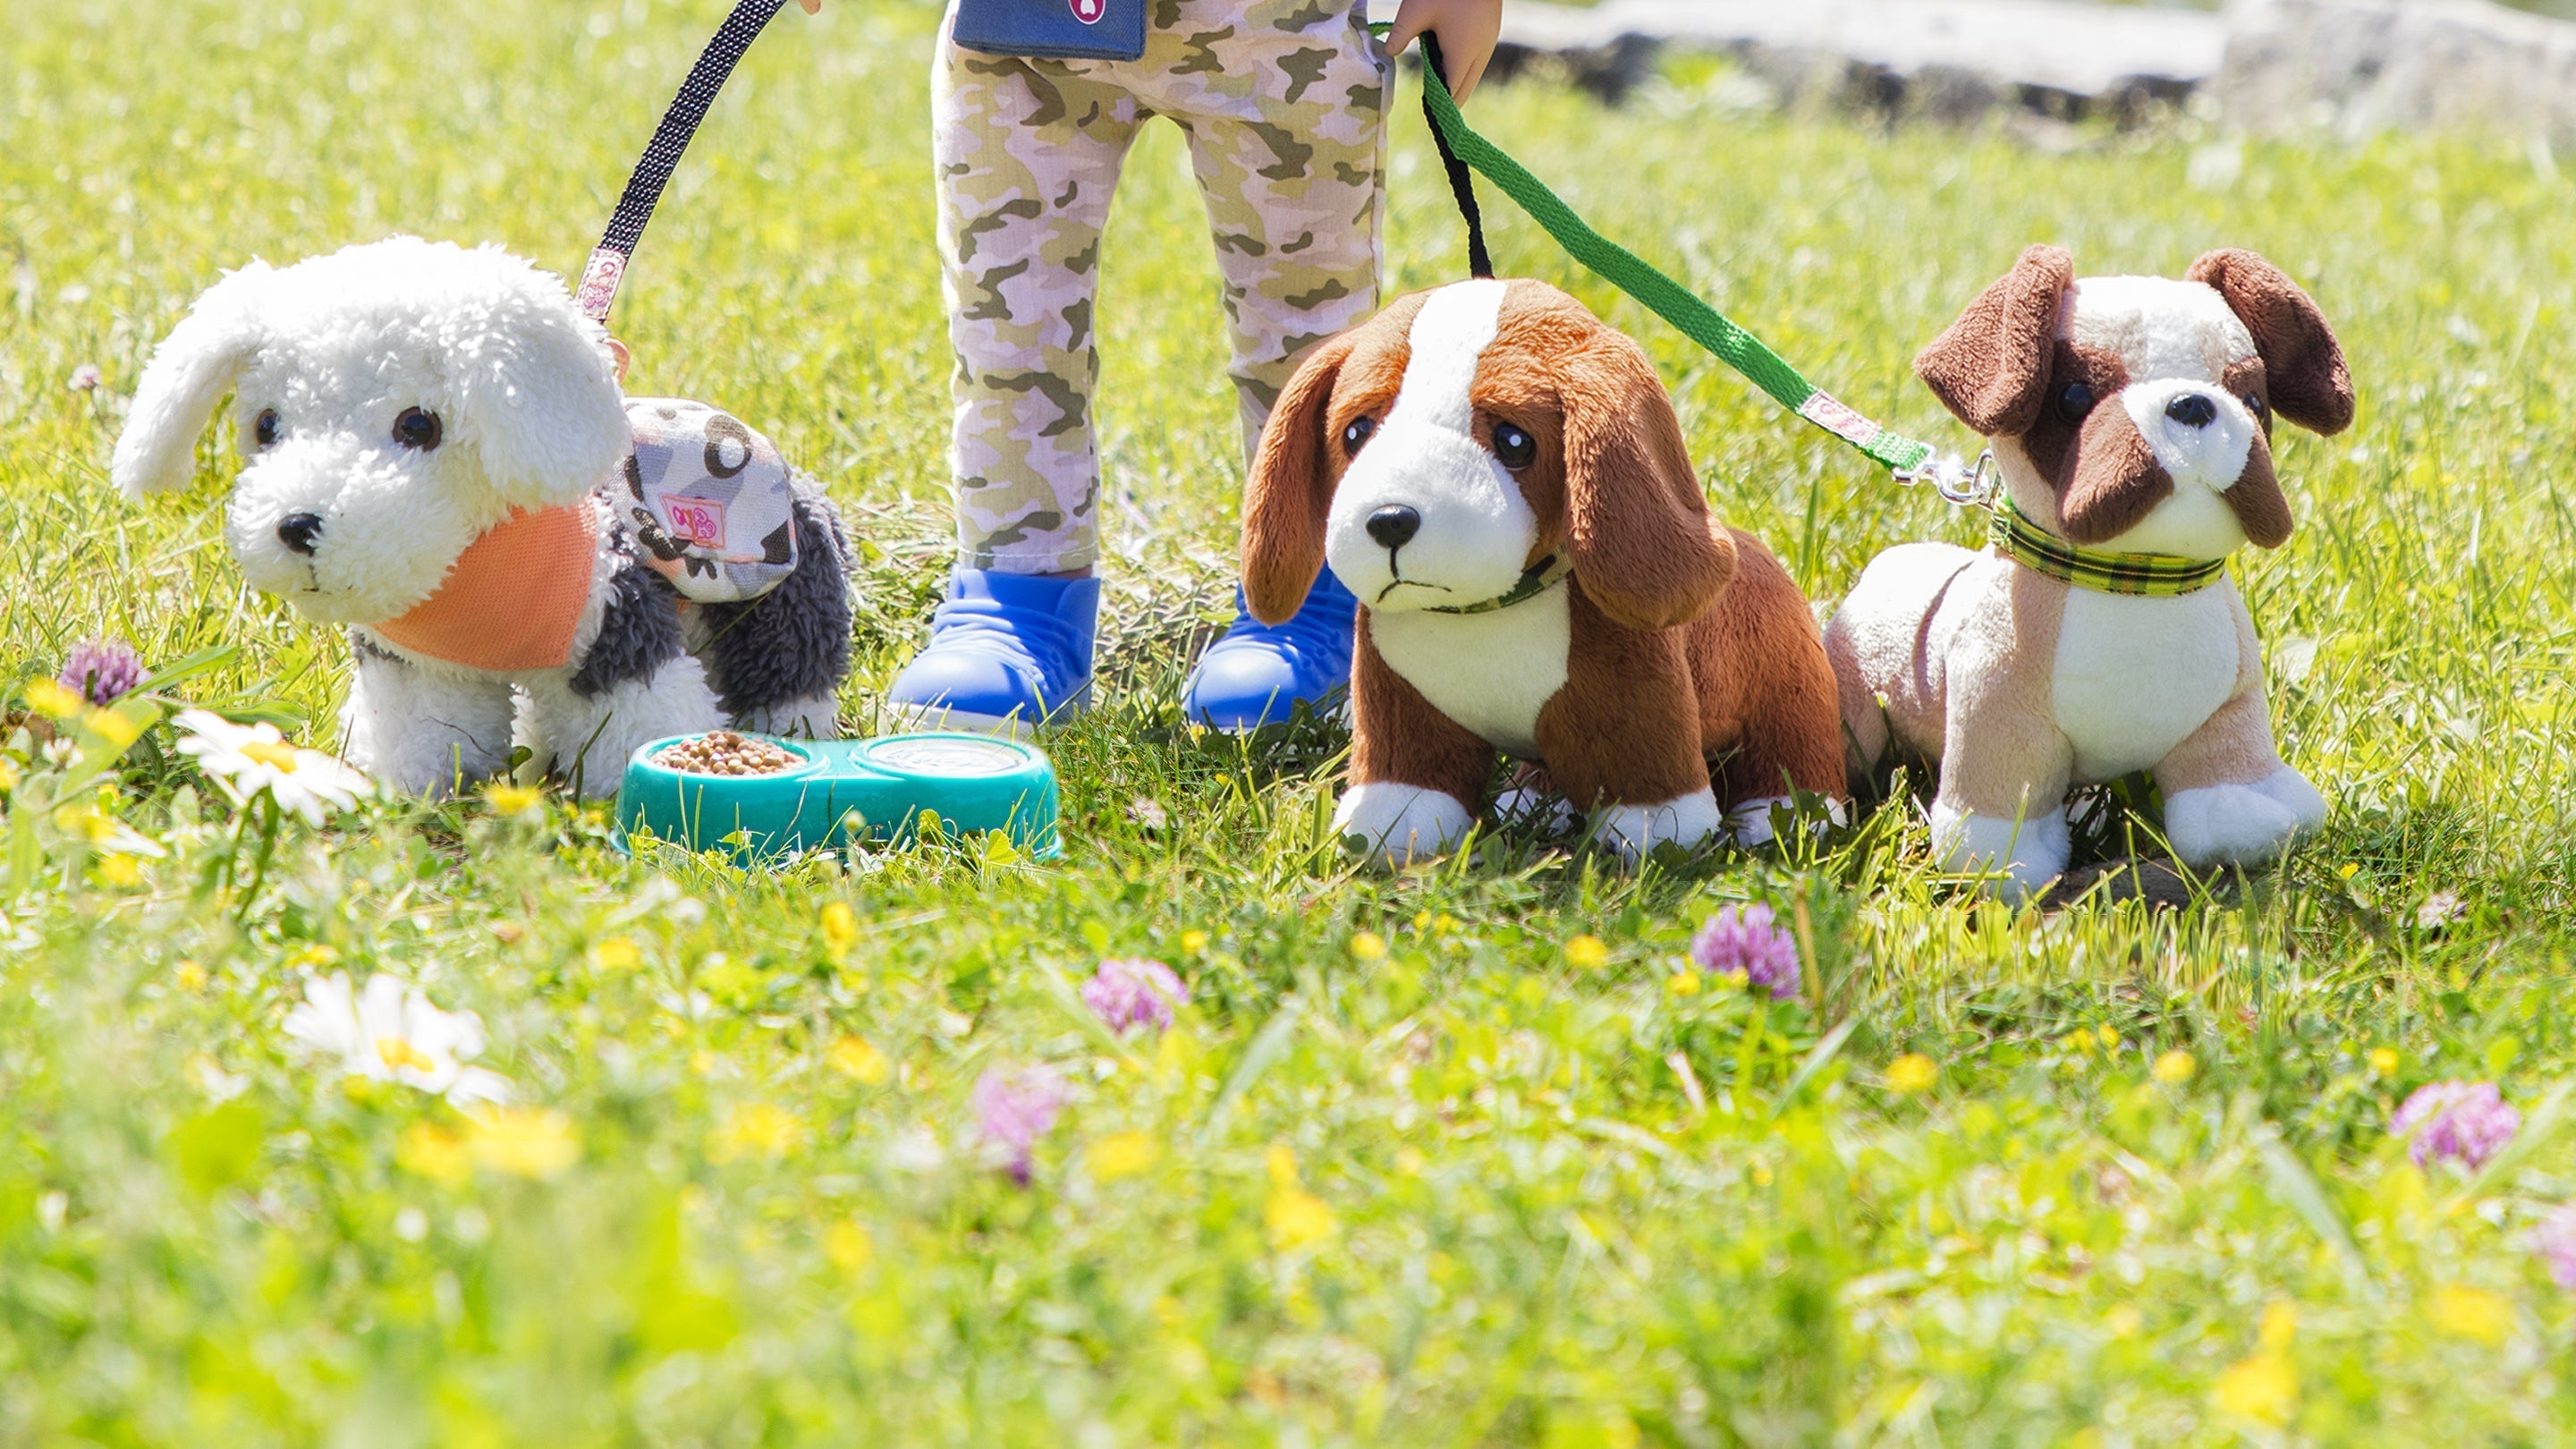 A Doll walking three plush puppies on leashes